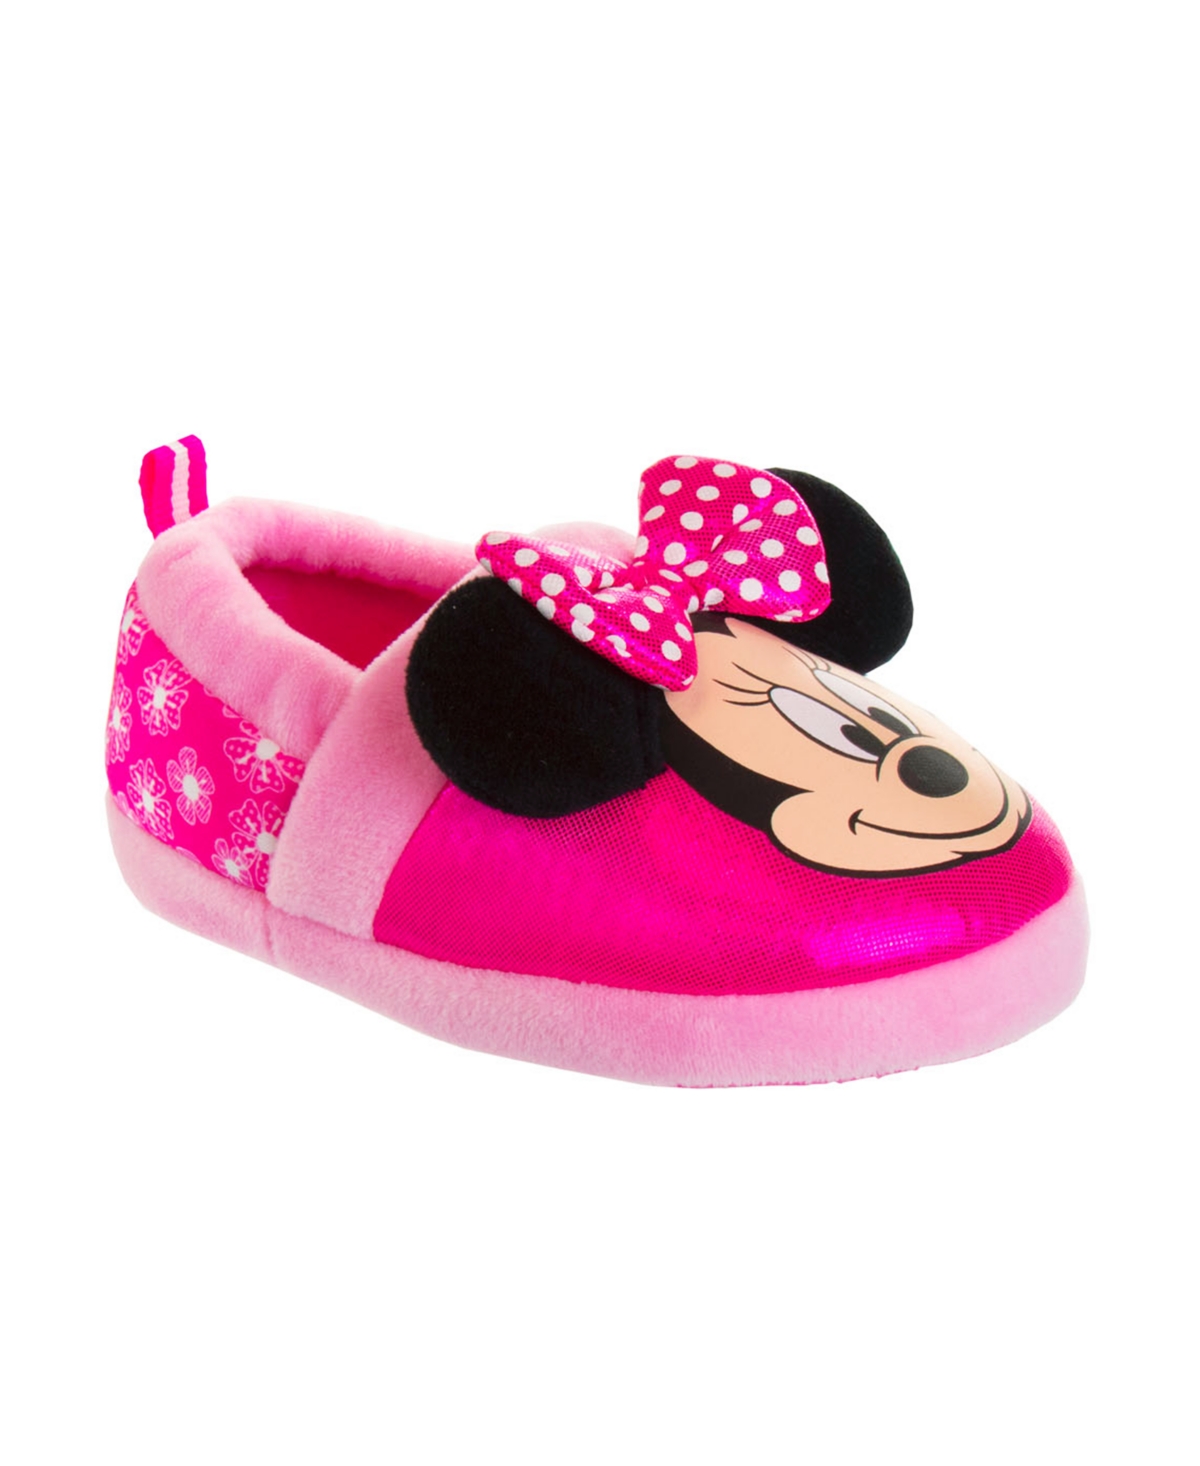 DISNEY TODDLER GIRLS MINNIE MOUSE DUAL SIZES HOUSE SLIPPERS